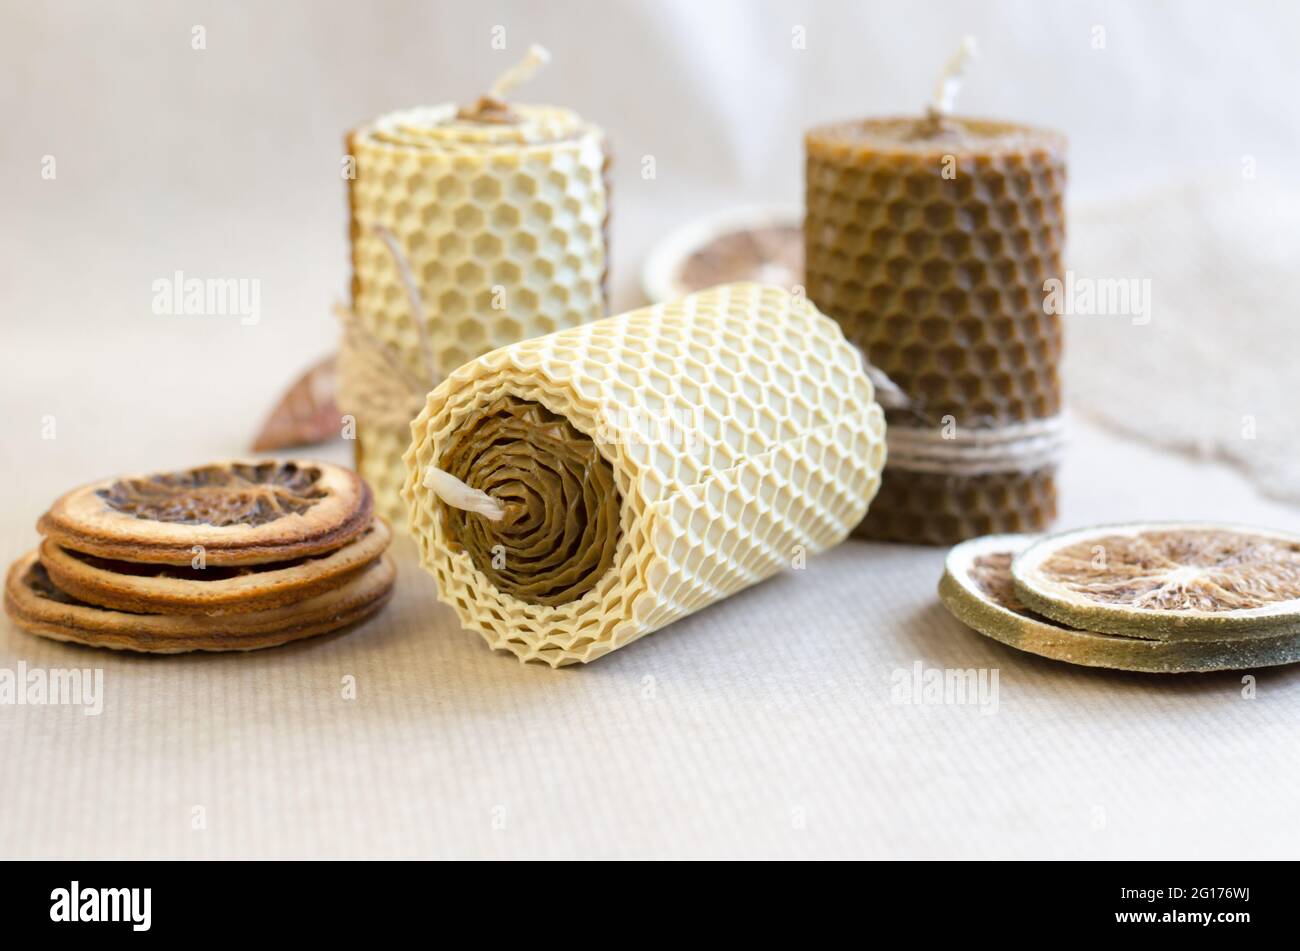 Decorations for the interior. Handmade decorative wax candles with honey aroma. Stock Photo